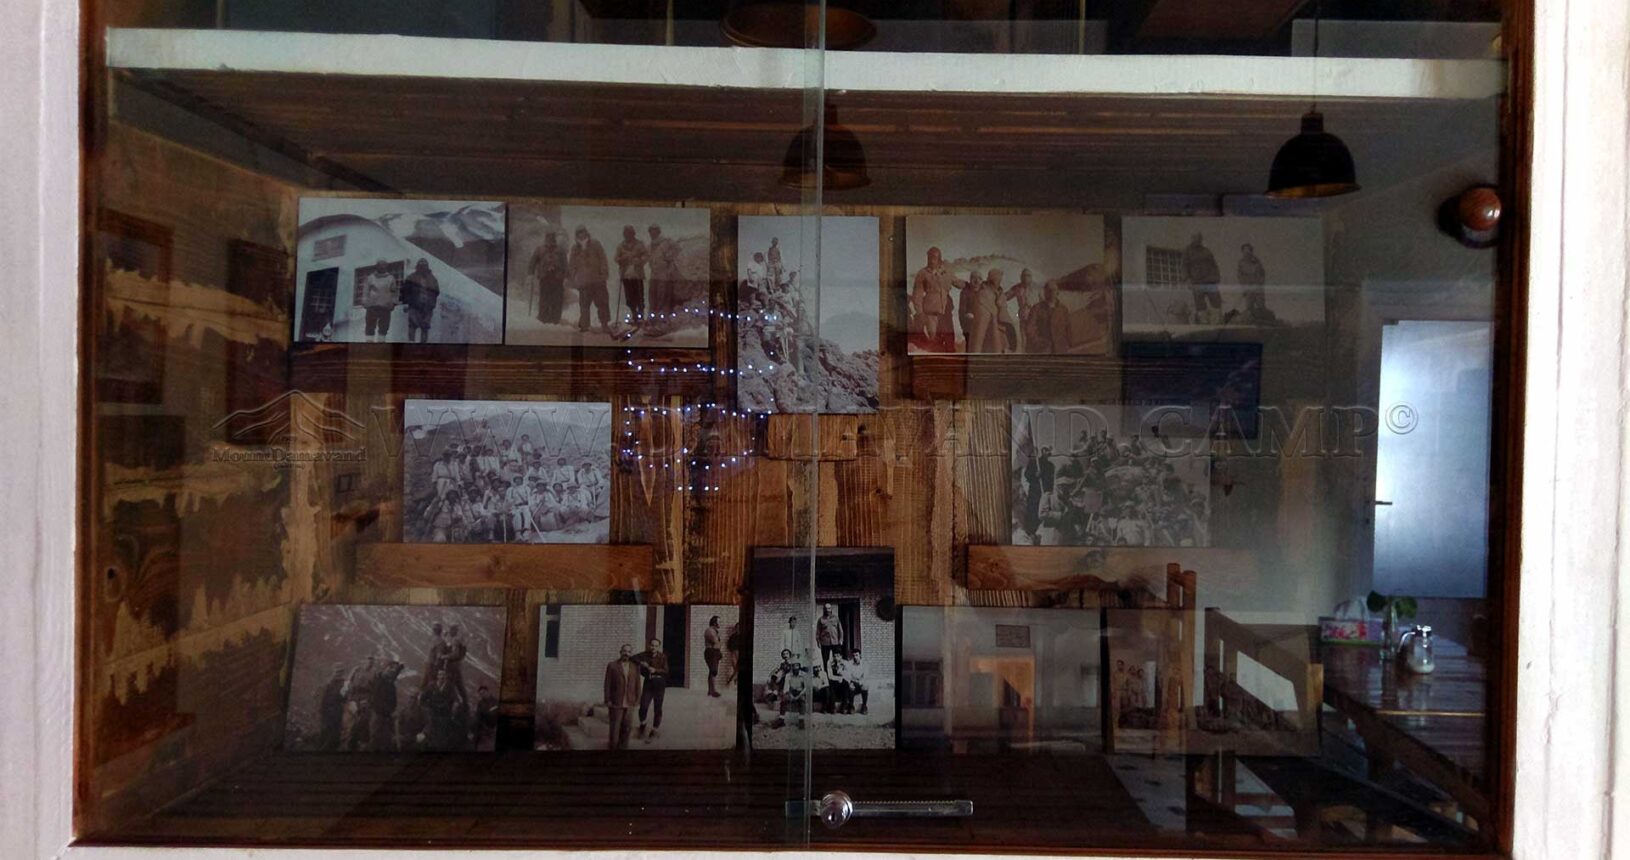 Old photos of Damavand expeditions and Mr. Faramarzpour.